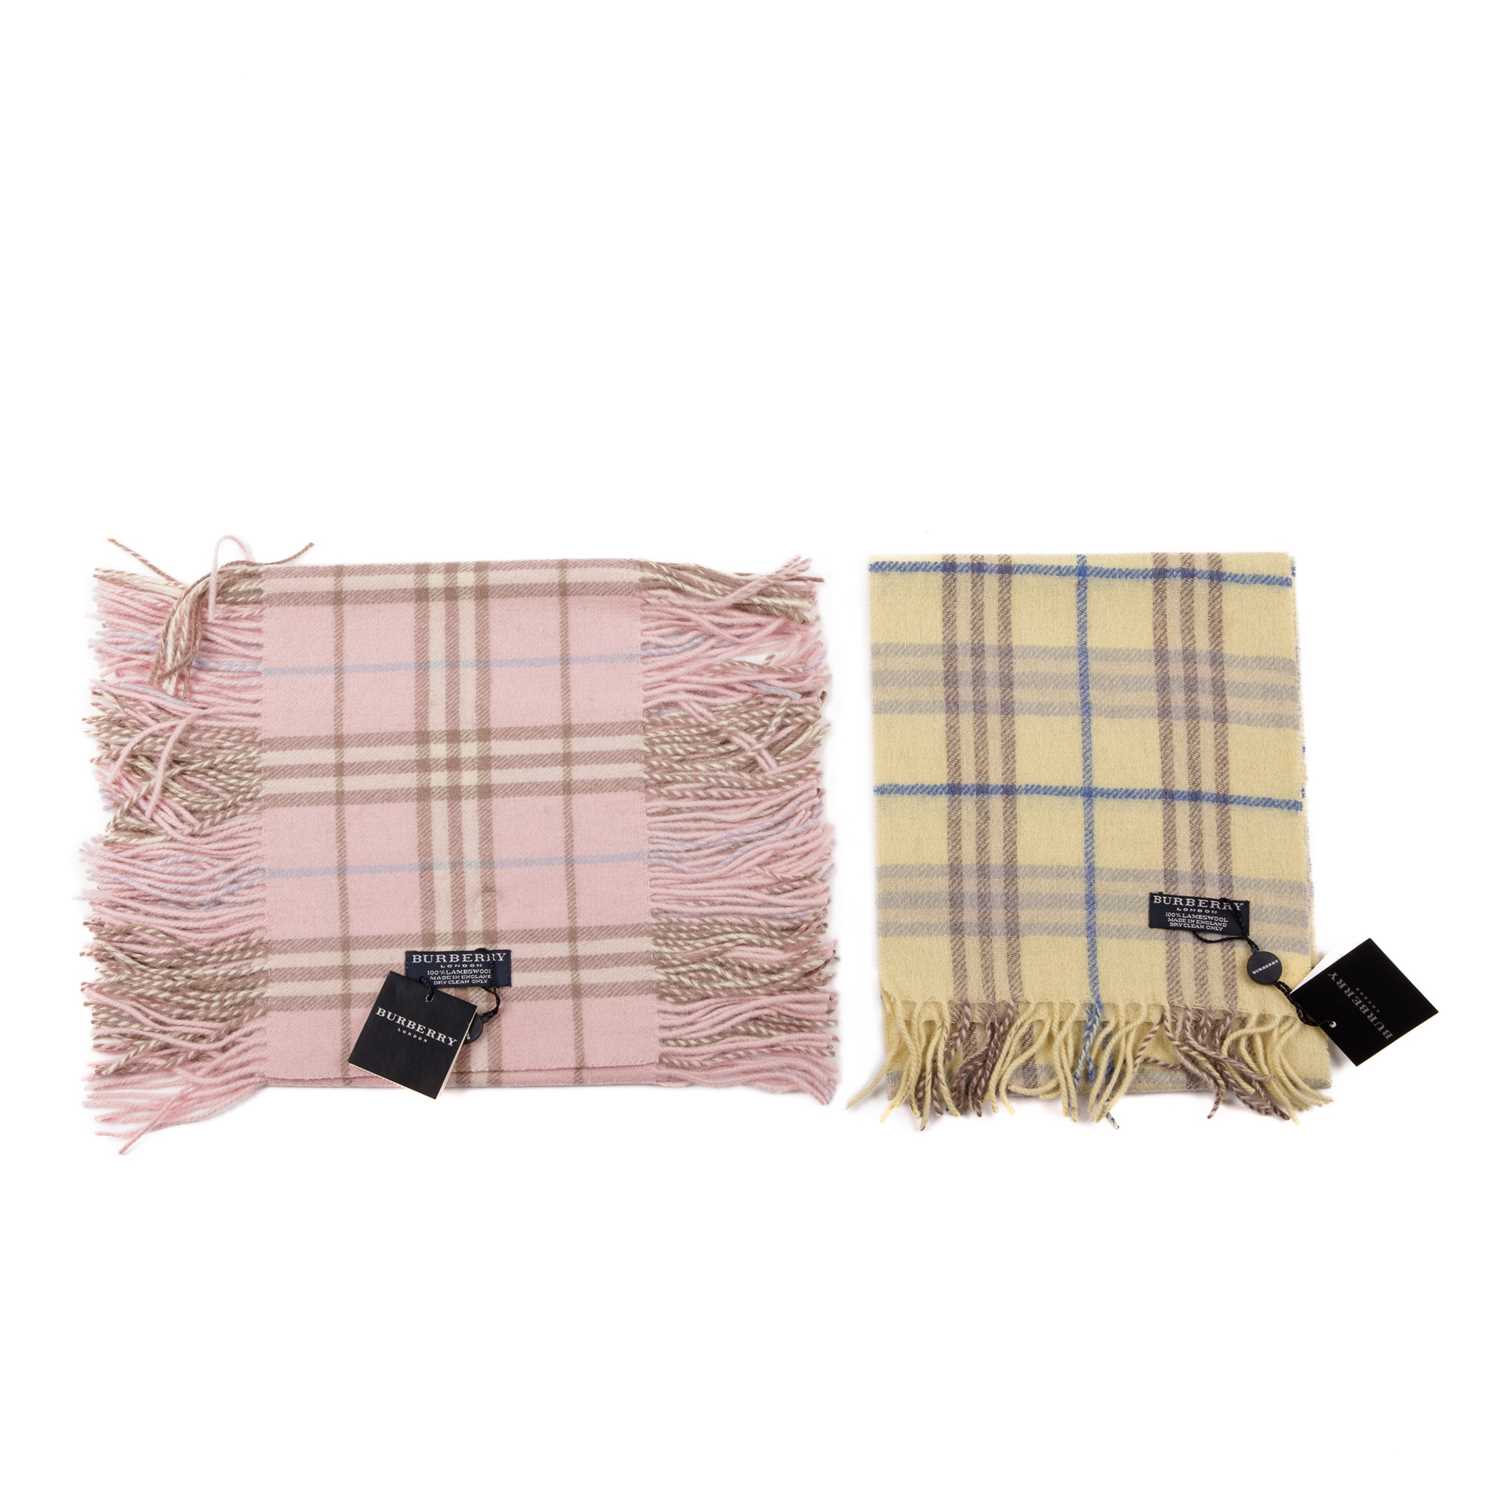 Burberry, two Nova Check lambswool scarves, to include a pale yellow scarf with fringe detailing - Image 2 of 4